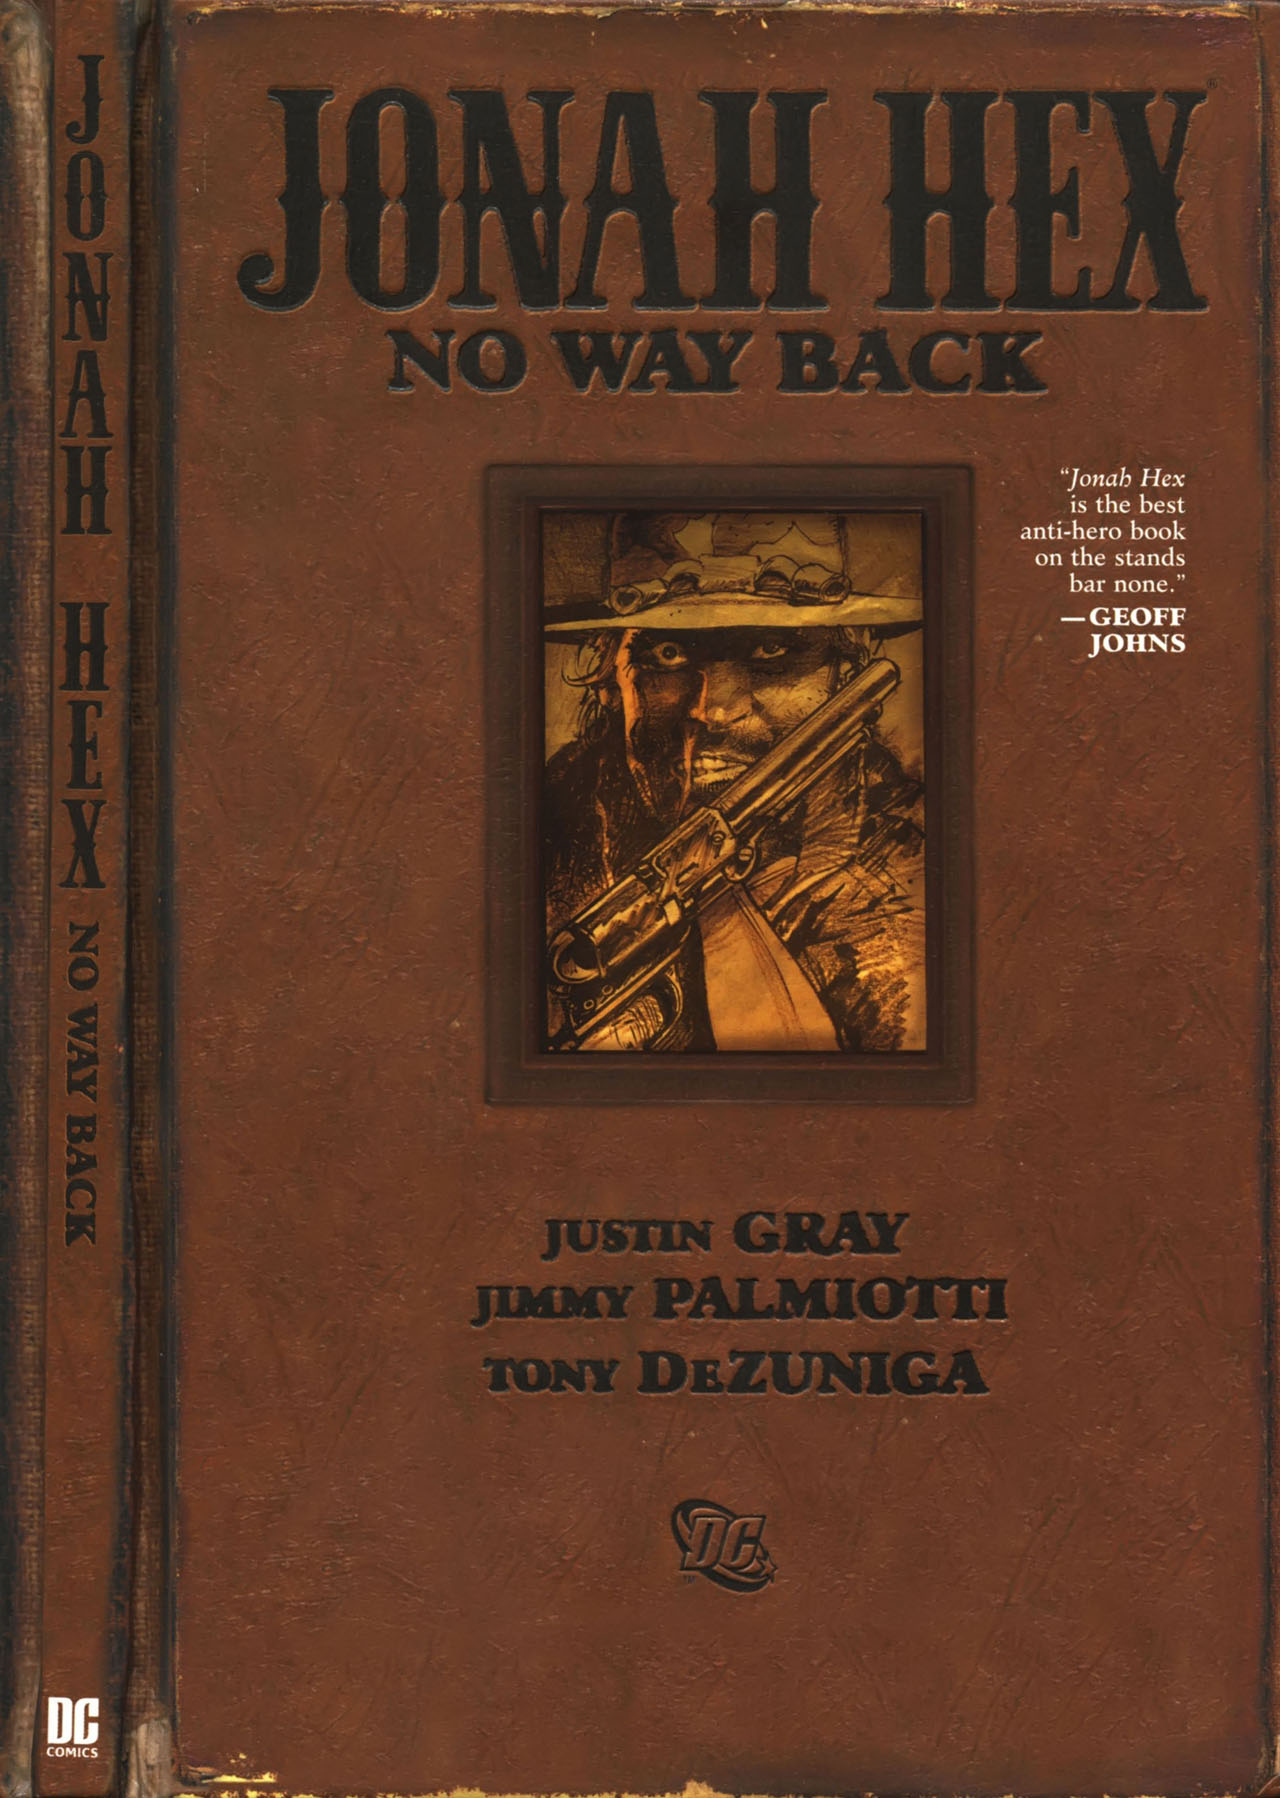 Read online Jonah Hex: No Way Back comic -  Issue # TPB - 1